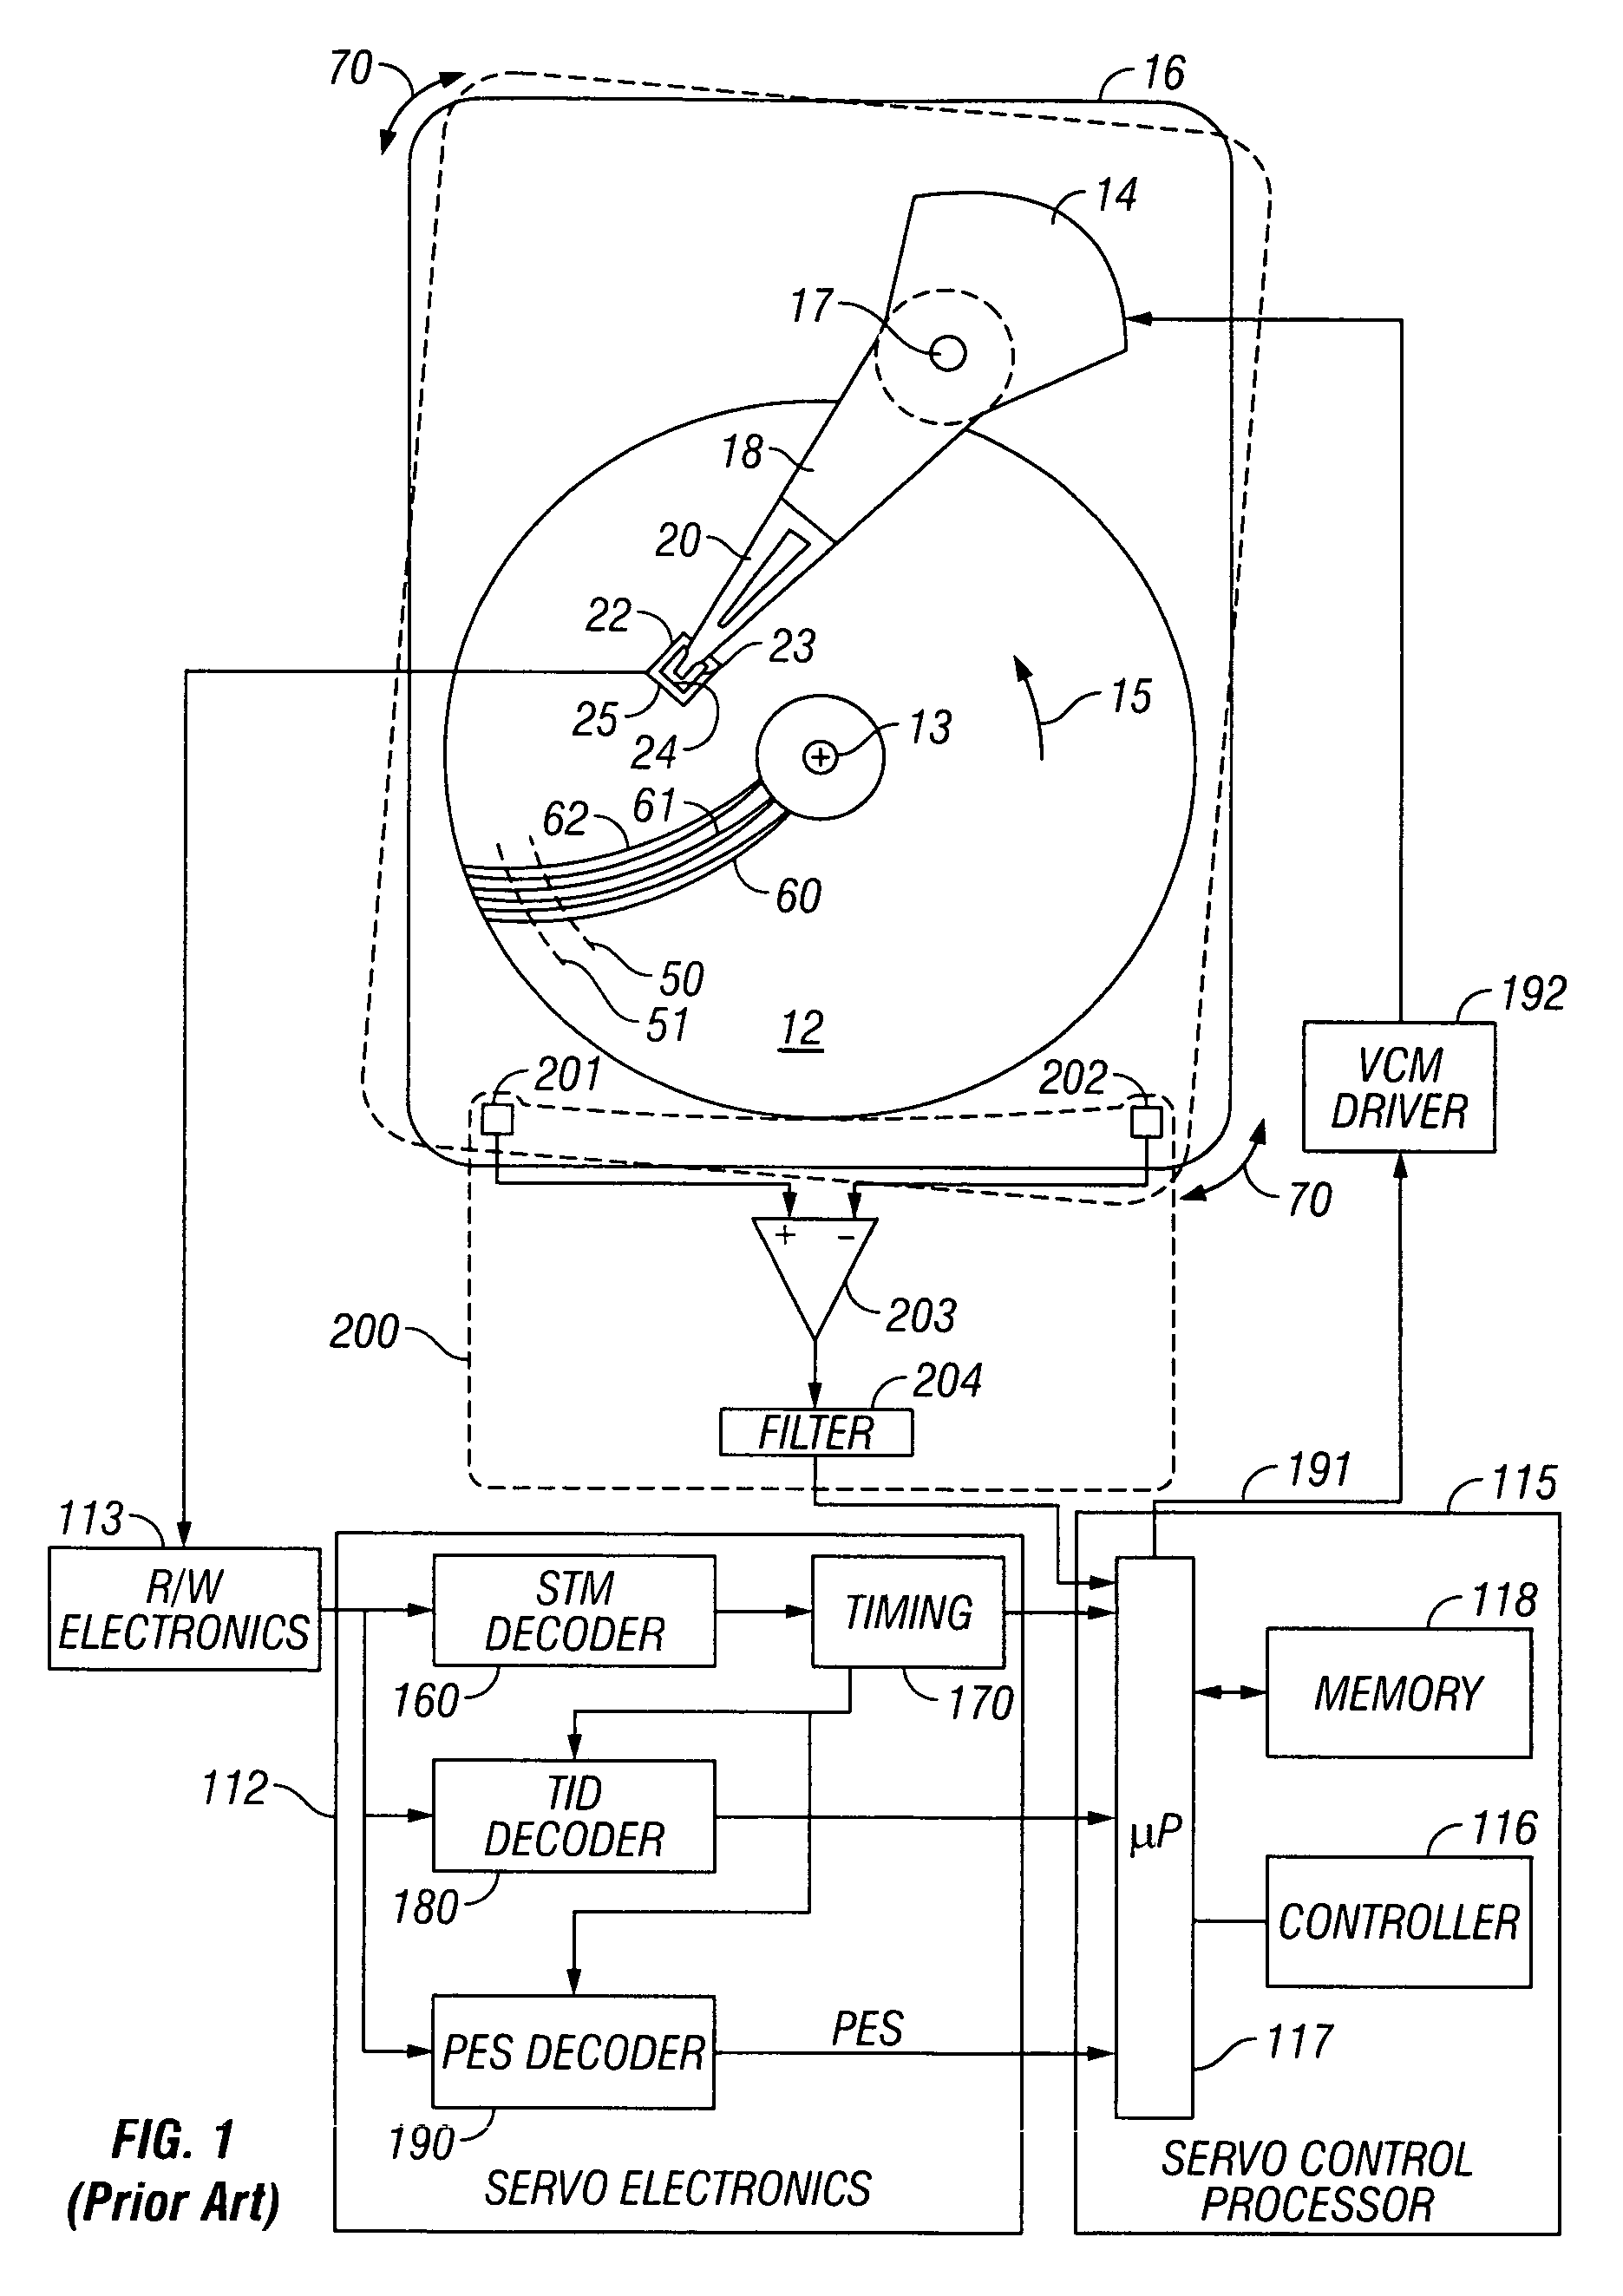 Magnetic recording disk drive with multiple feedforward controllers for rotational vibration cancellation